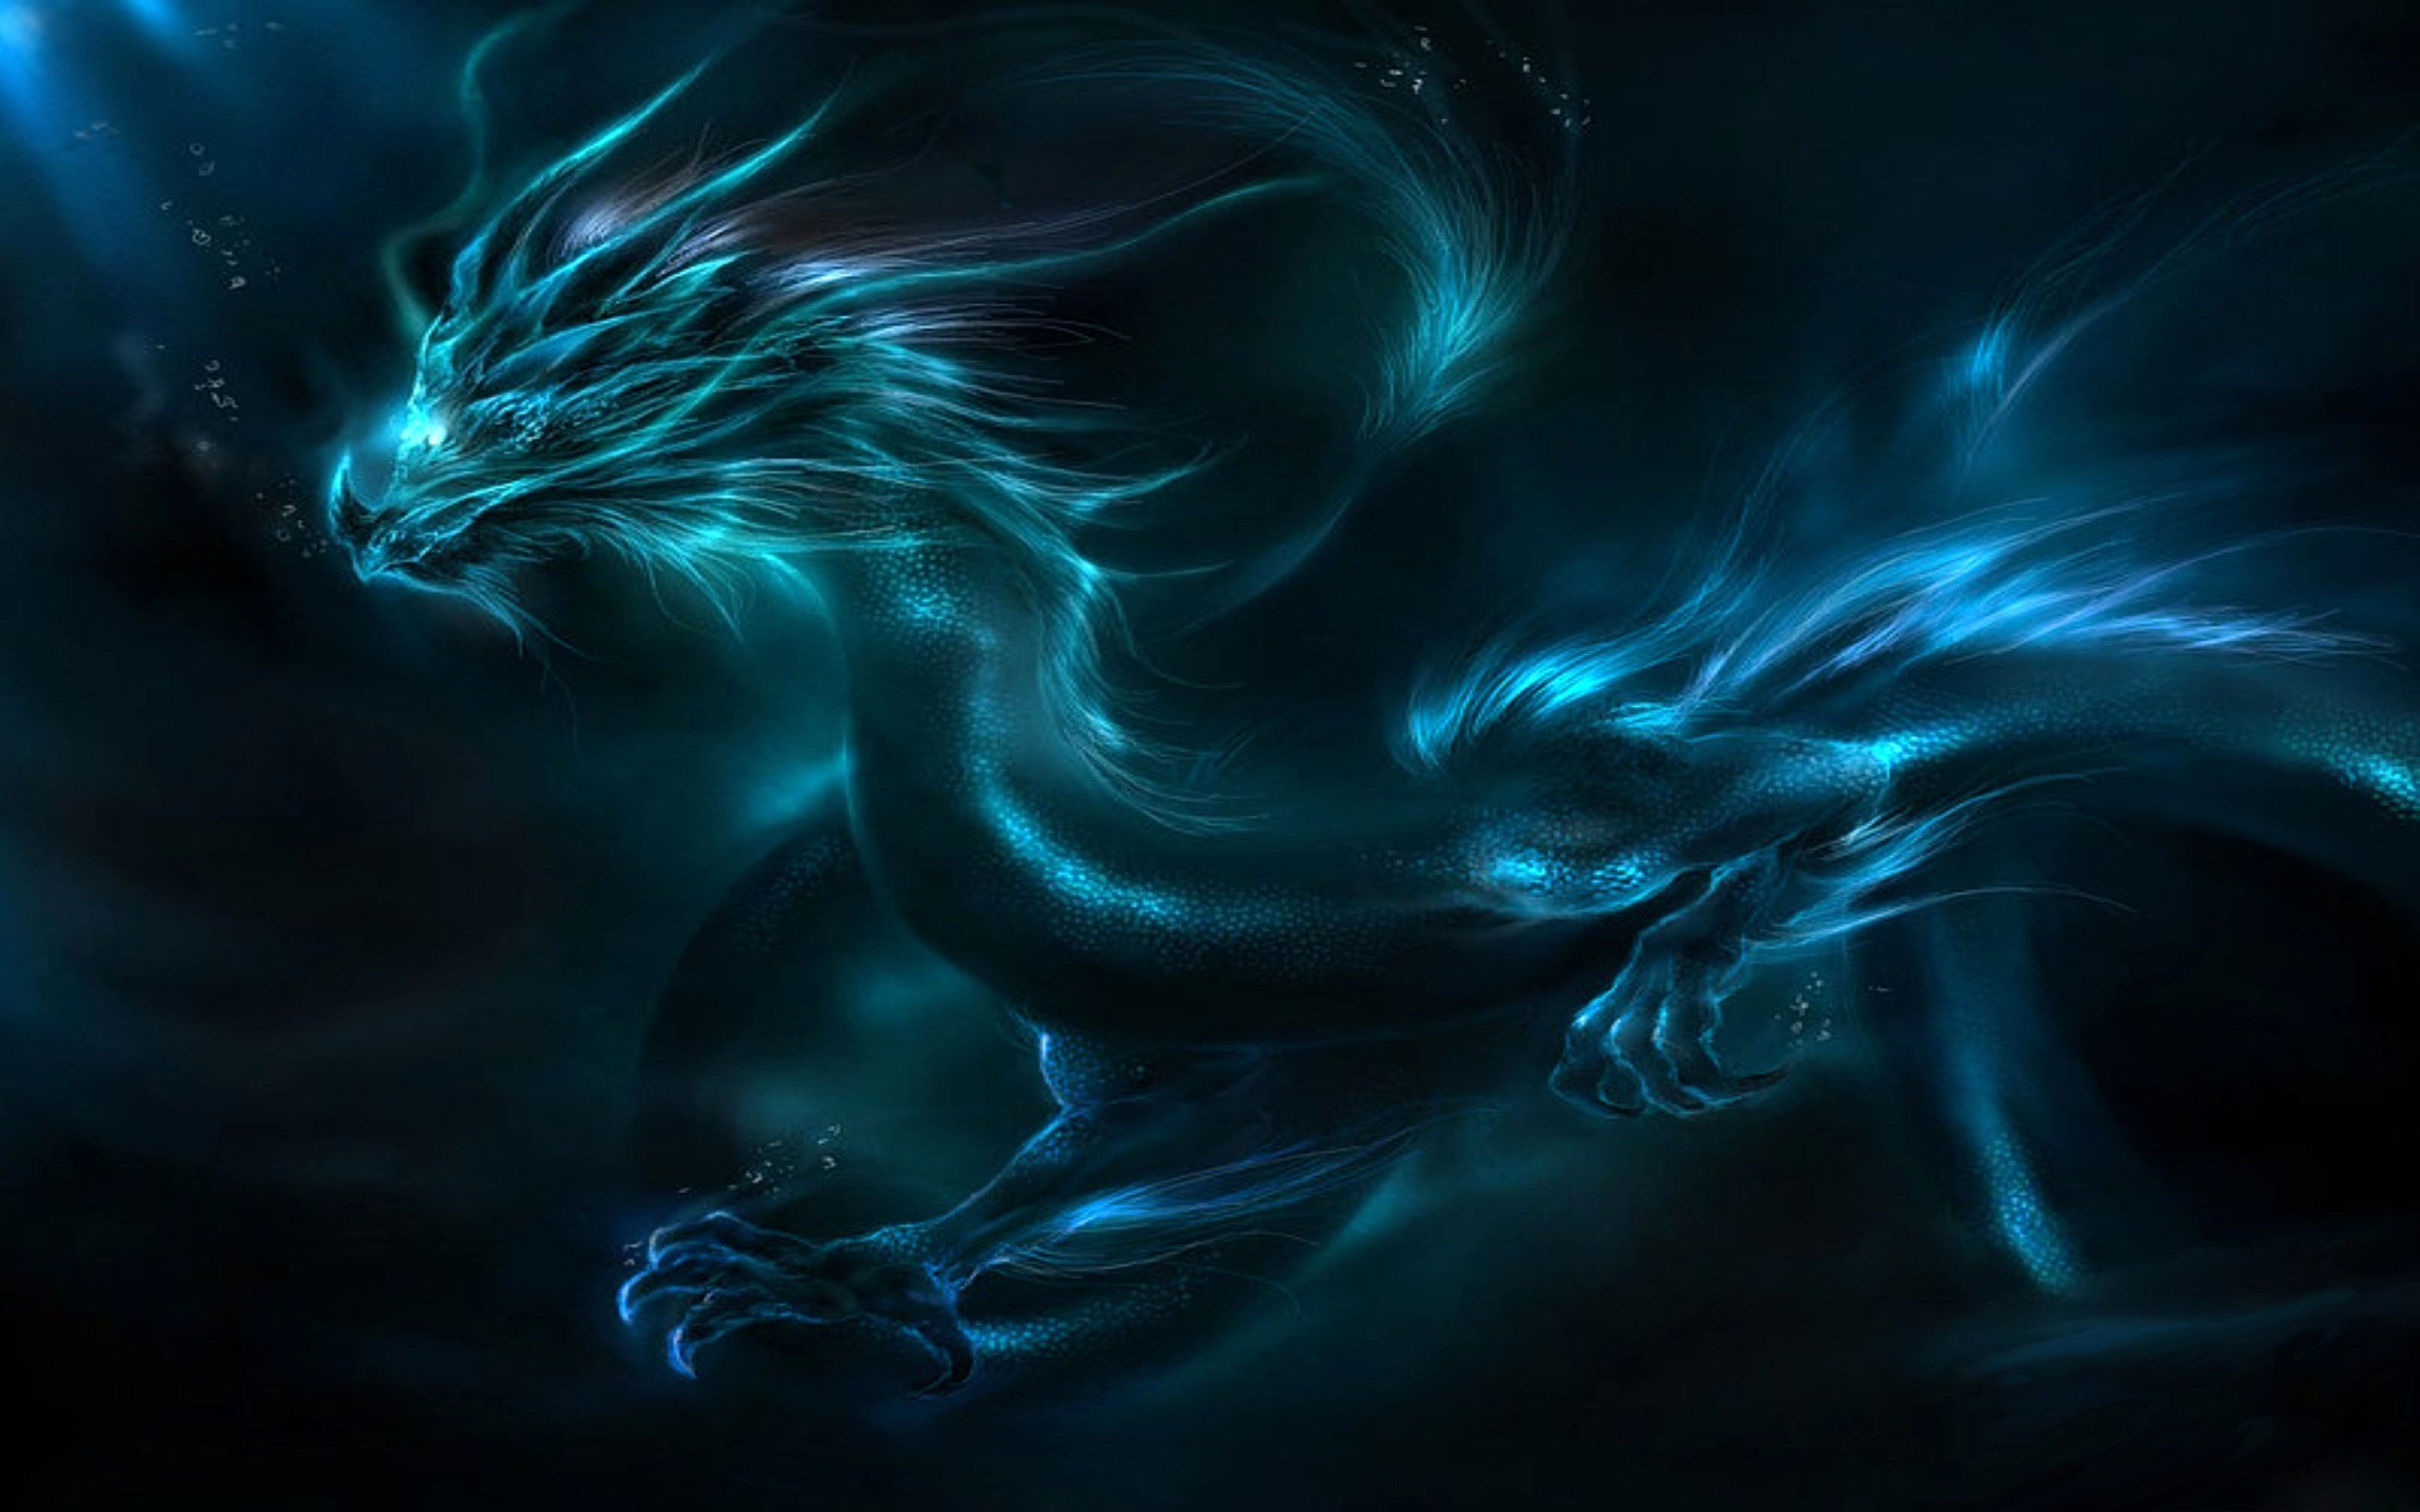 HD Dragon Wallpaper for computer With Resolutions 25601600 Pixel